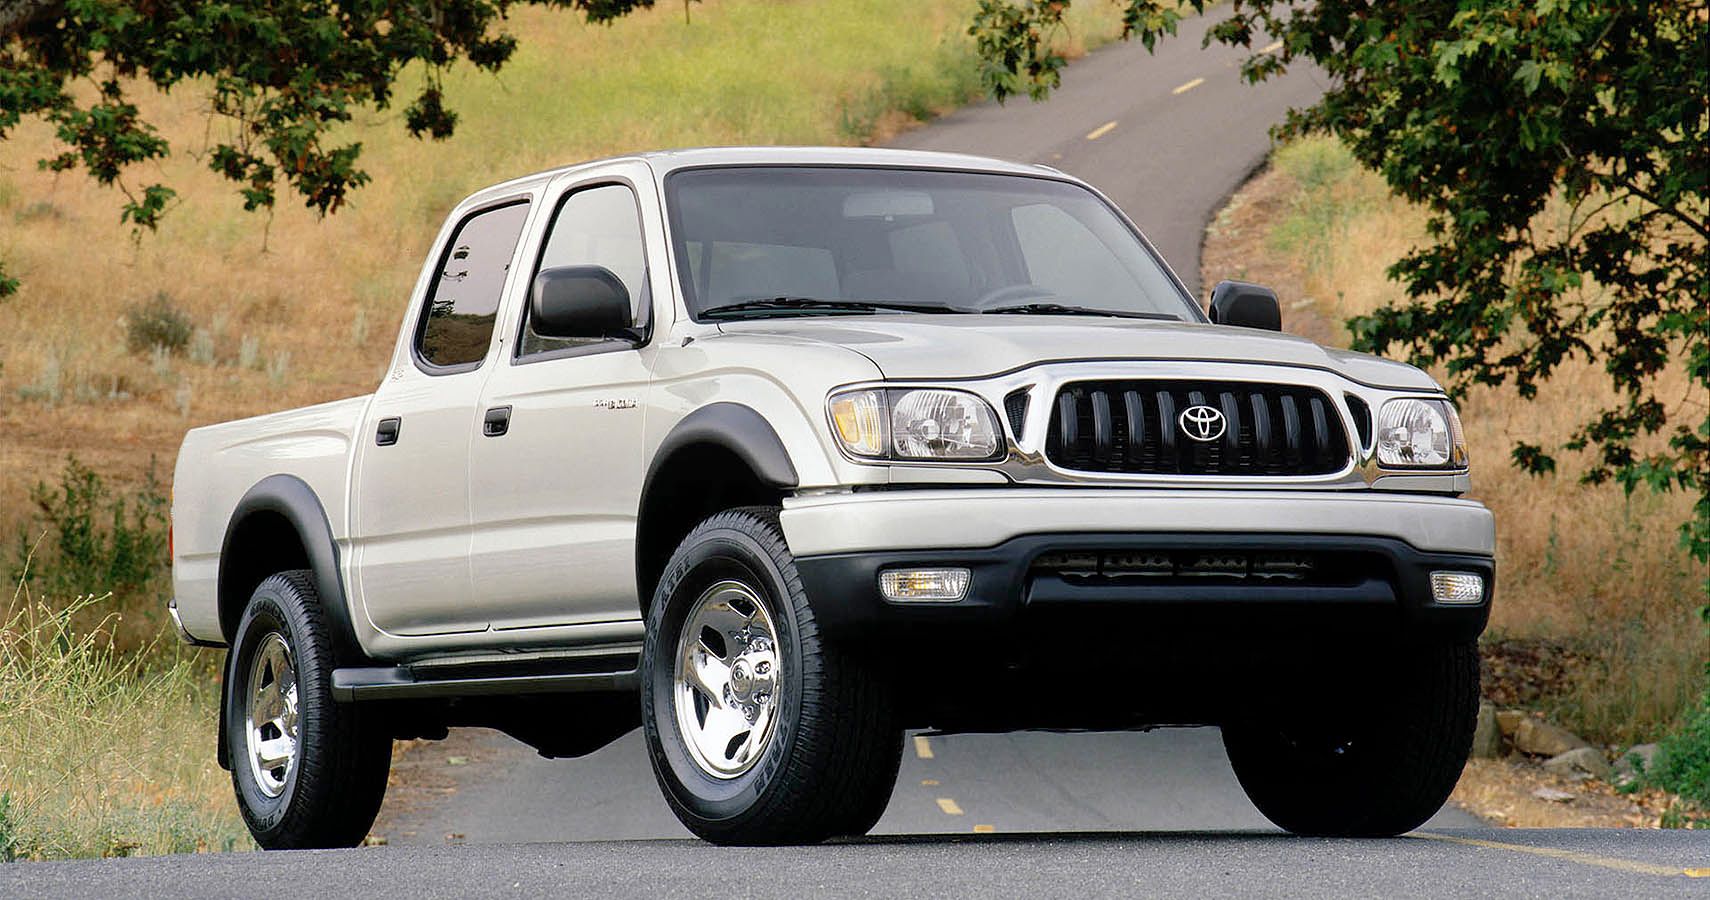 Looking Back At The First Generation Toyota Tacoma